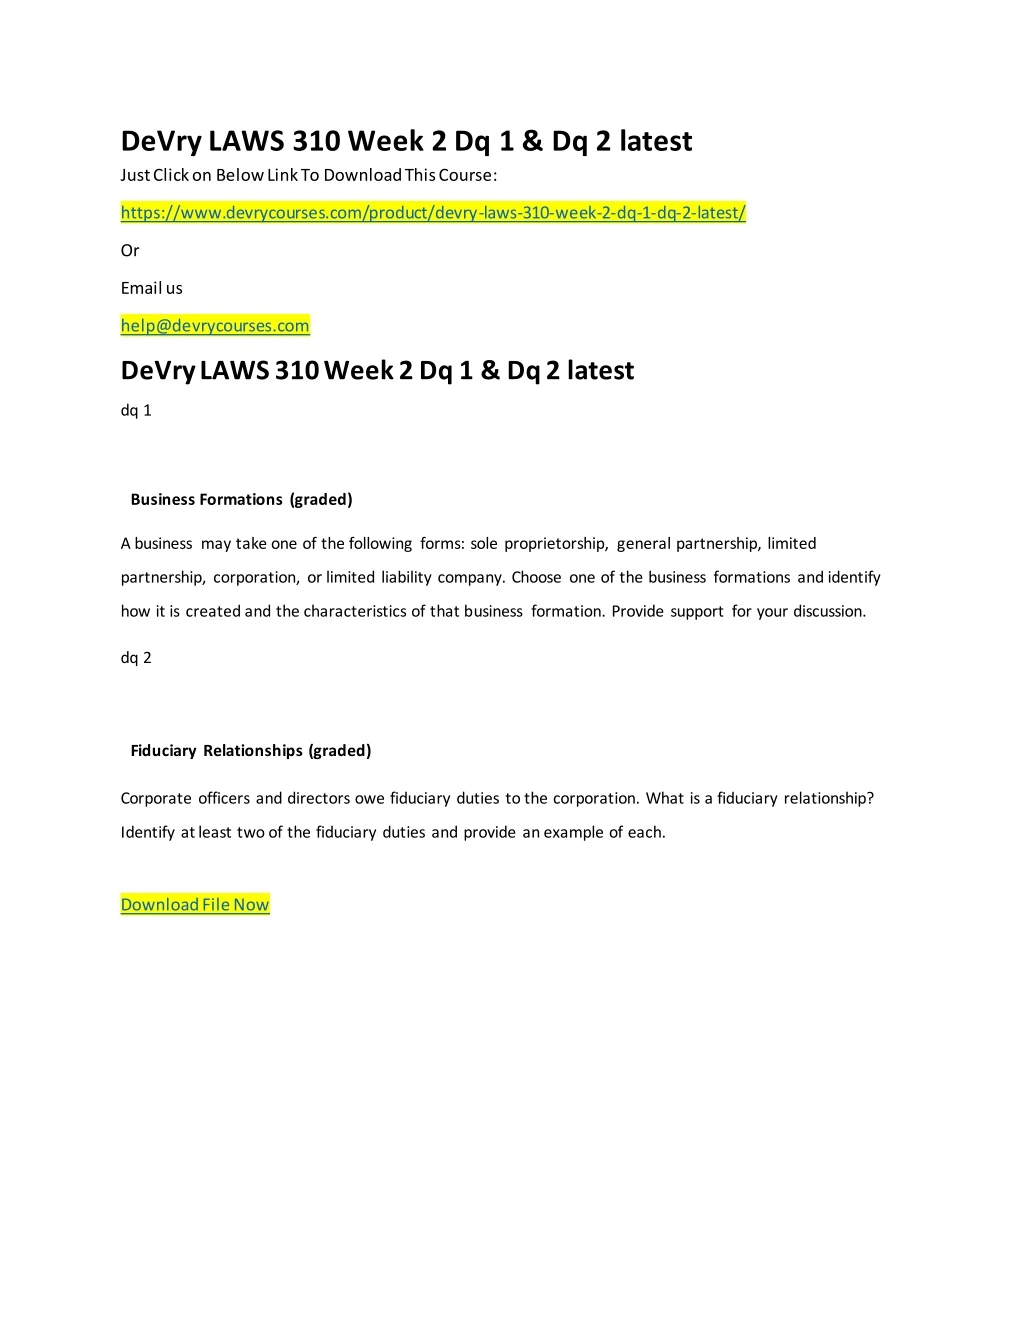 devry laws 310 week 2 dq 1 dq 2 latest just click